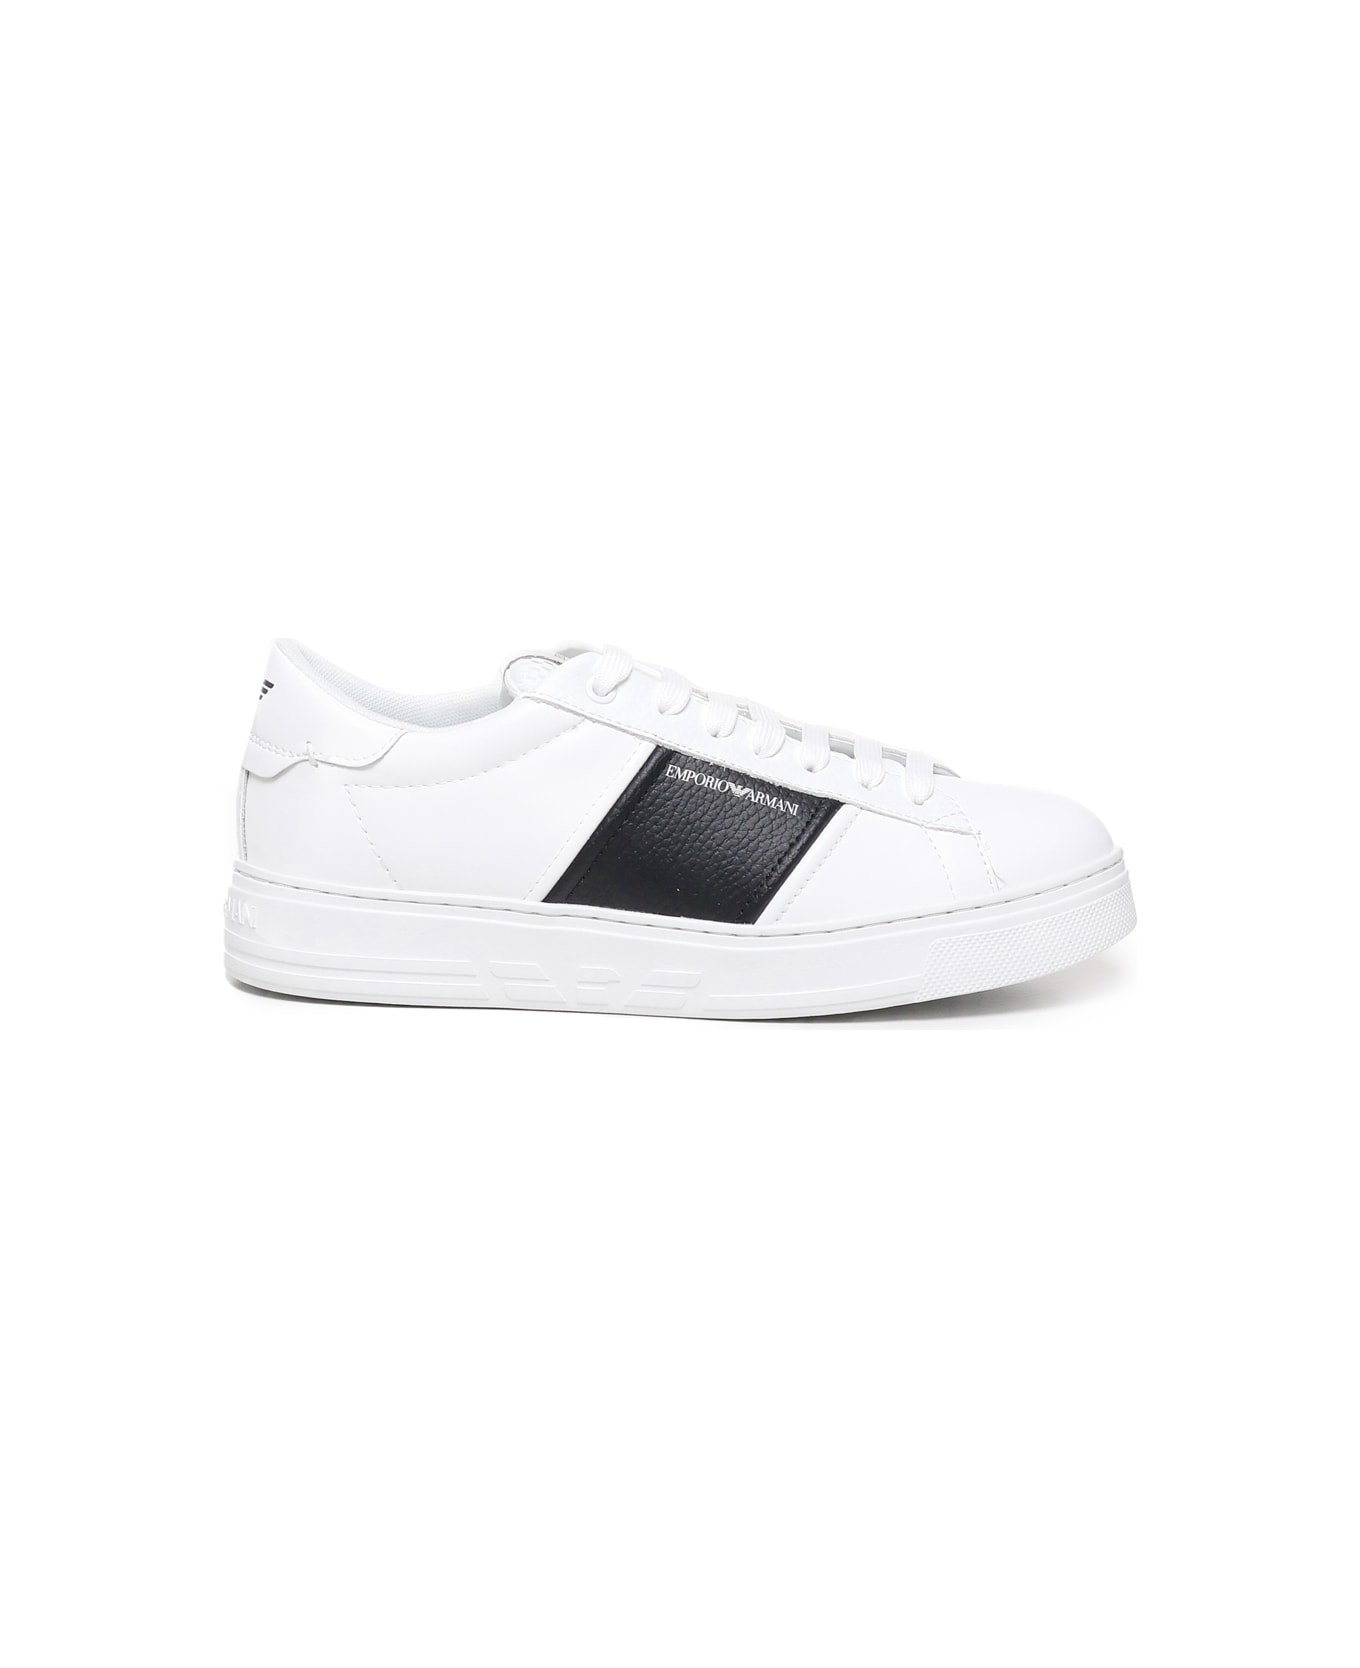 Emporio Armani Leather Sneakers With Logo - White スニーカー